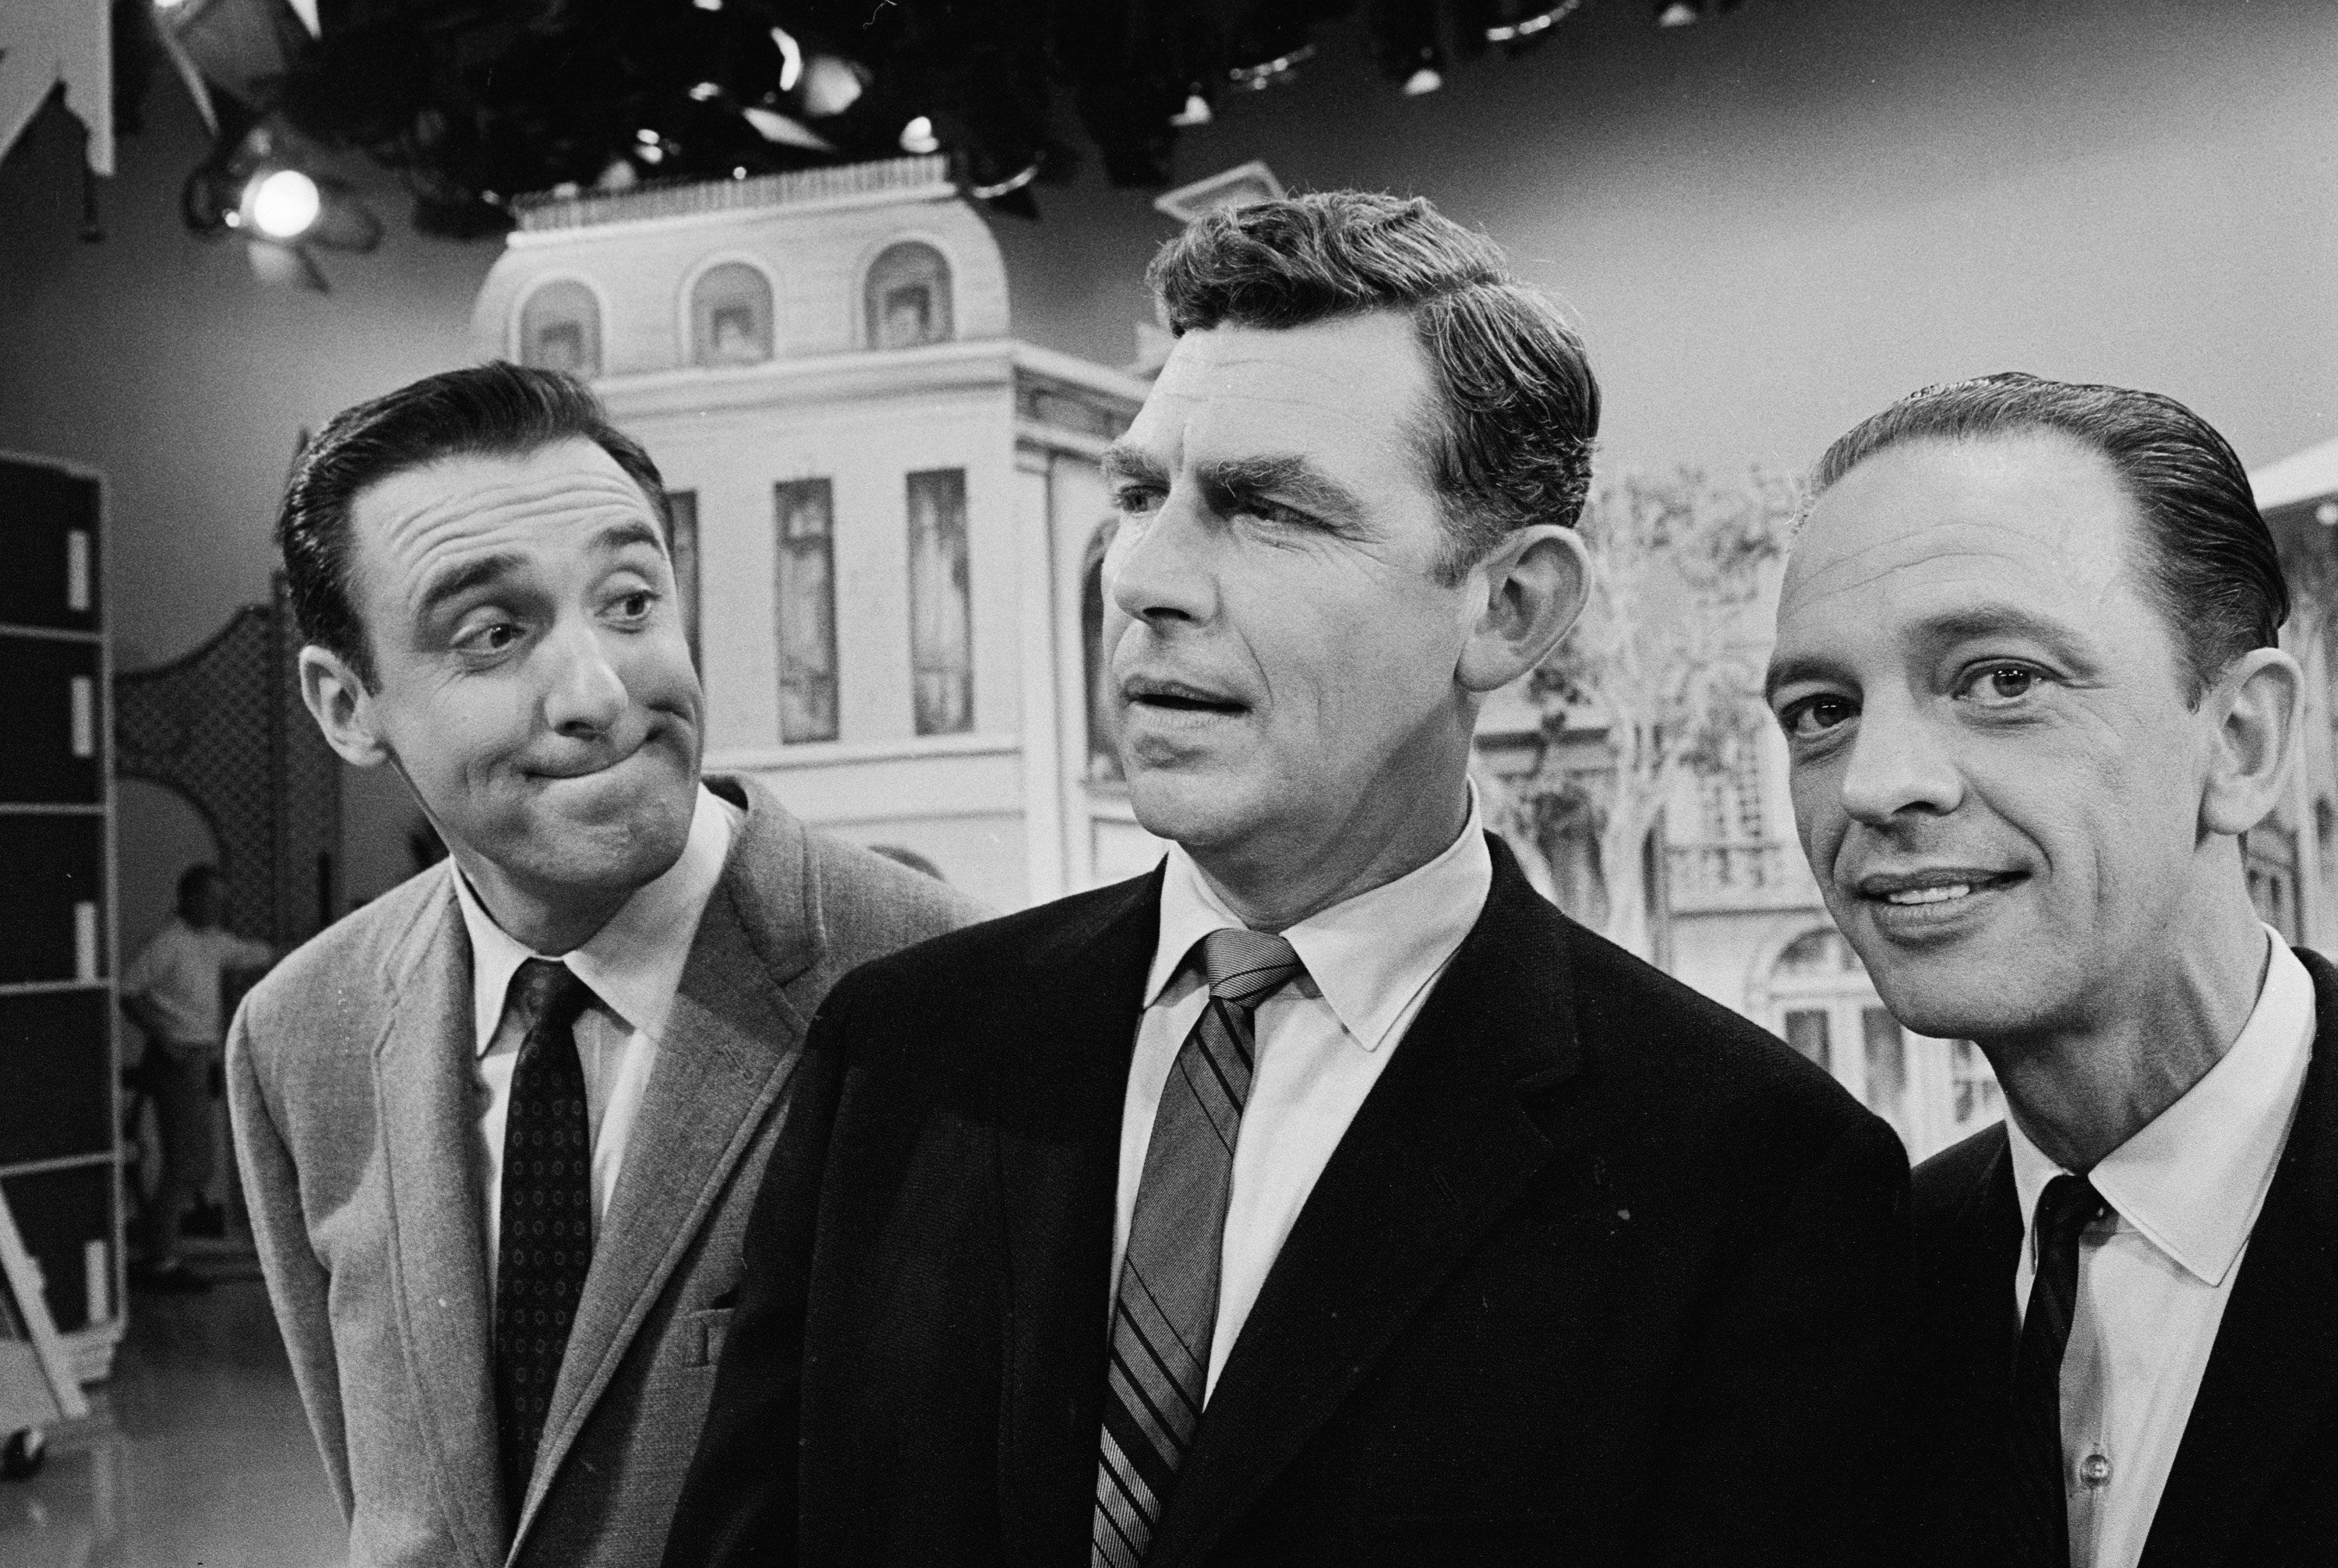 Jim Nabors, Andy Griffith, and Don Knotts in front of a set